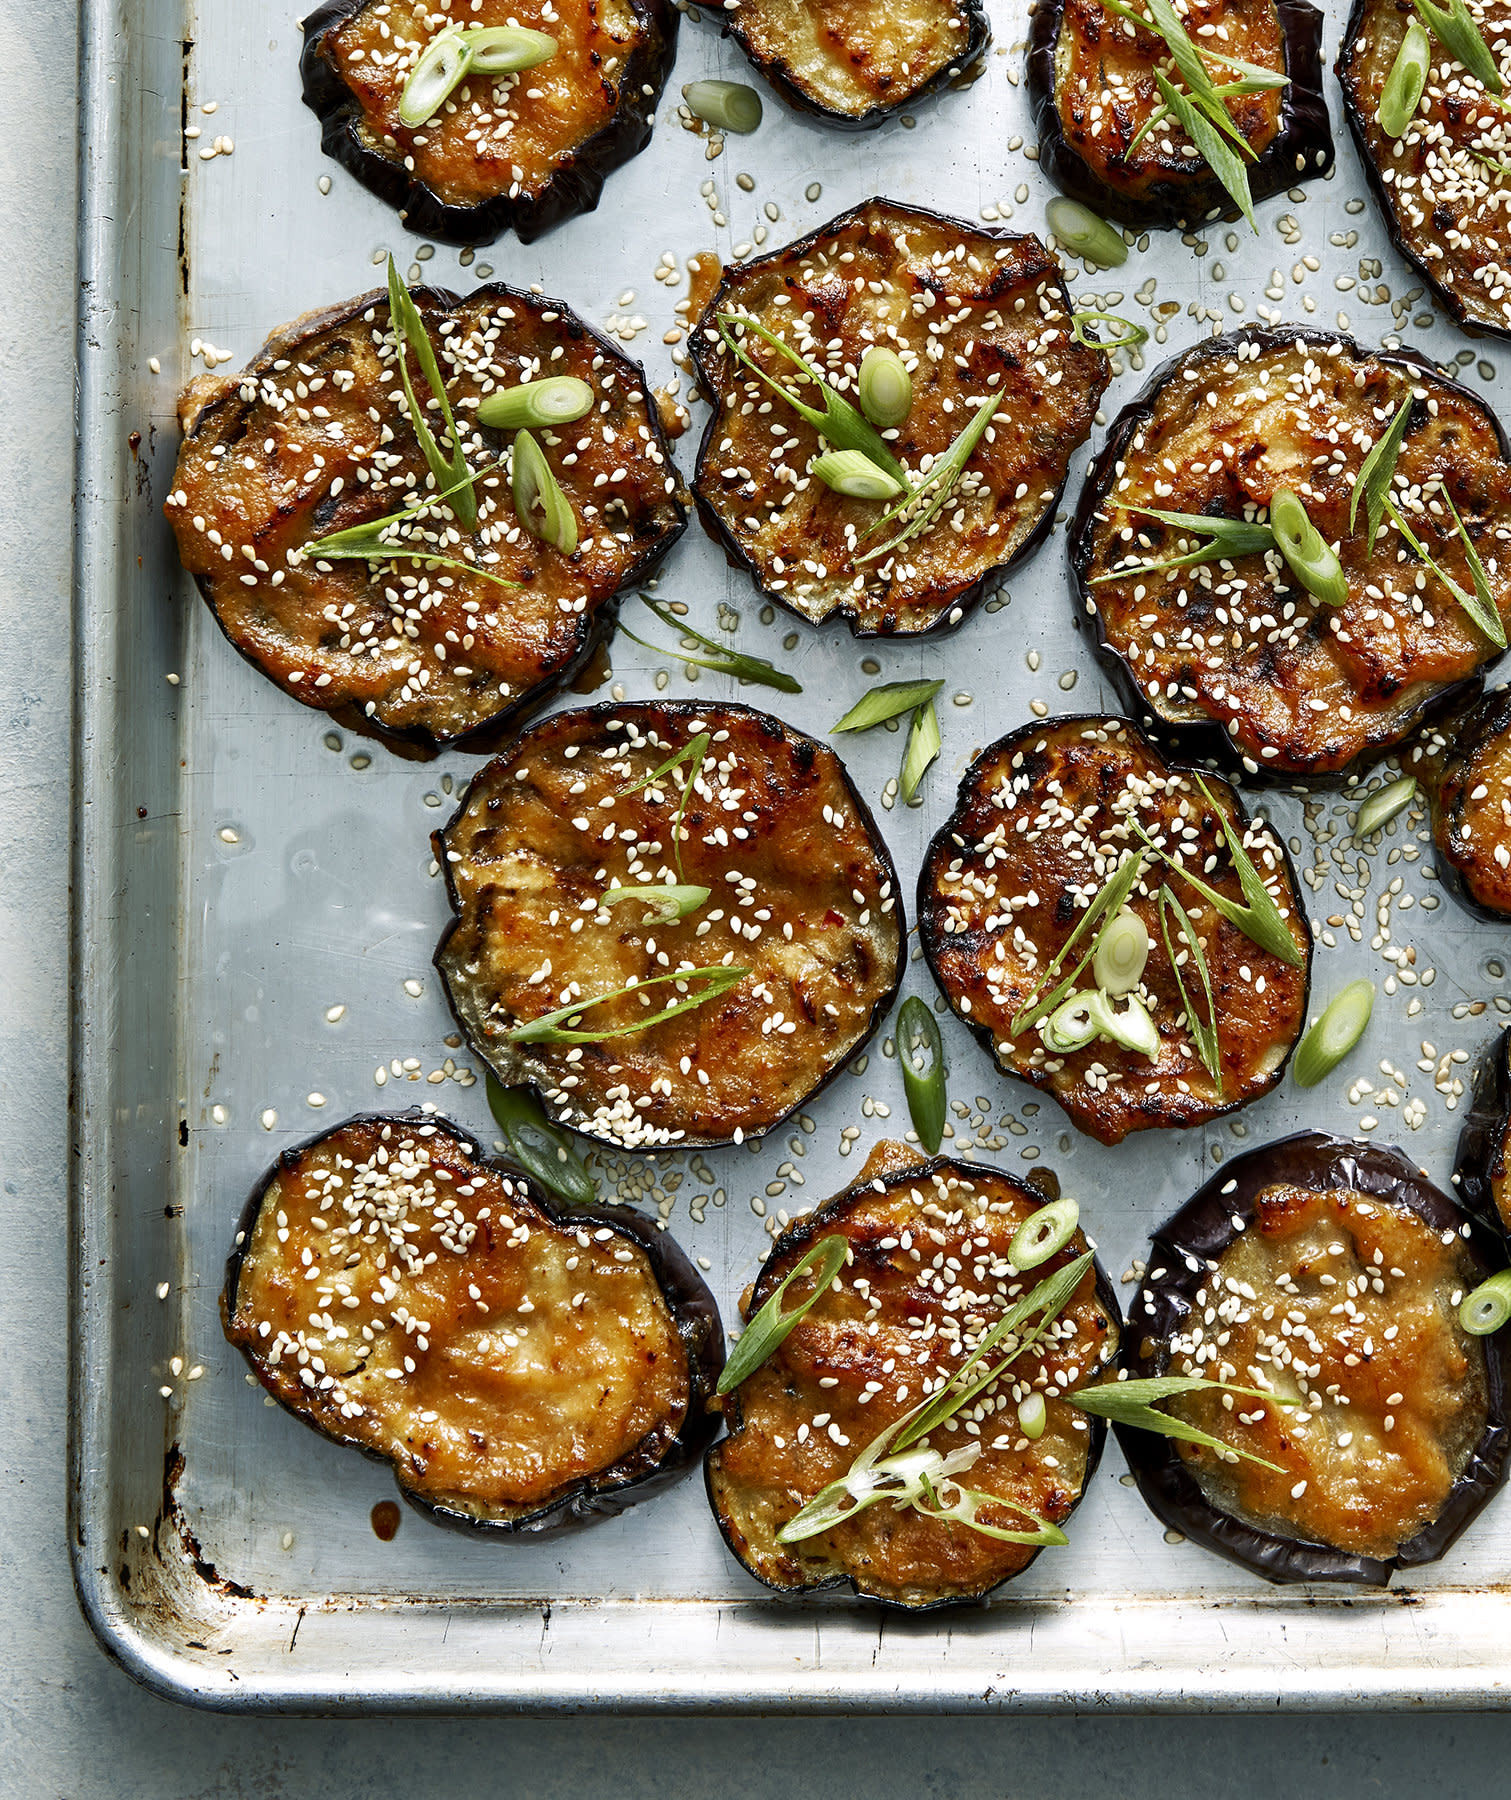 Roasted Eggplant Recipe Lovely 5 Easy Roasted Eggplant Recipes that Everyone Will Love